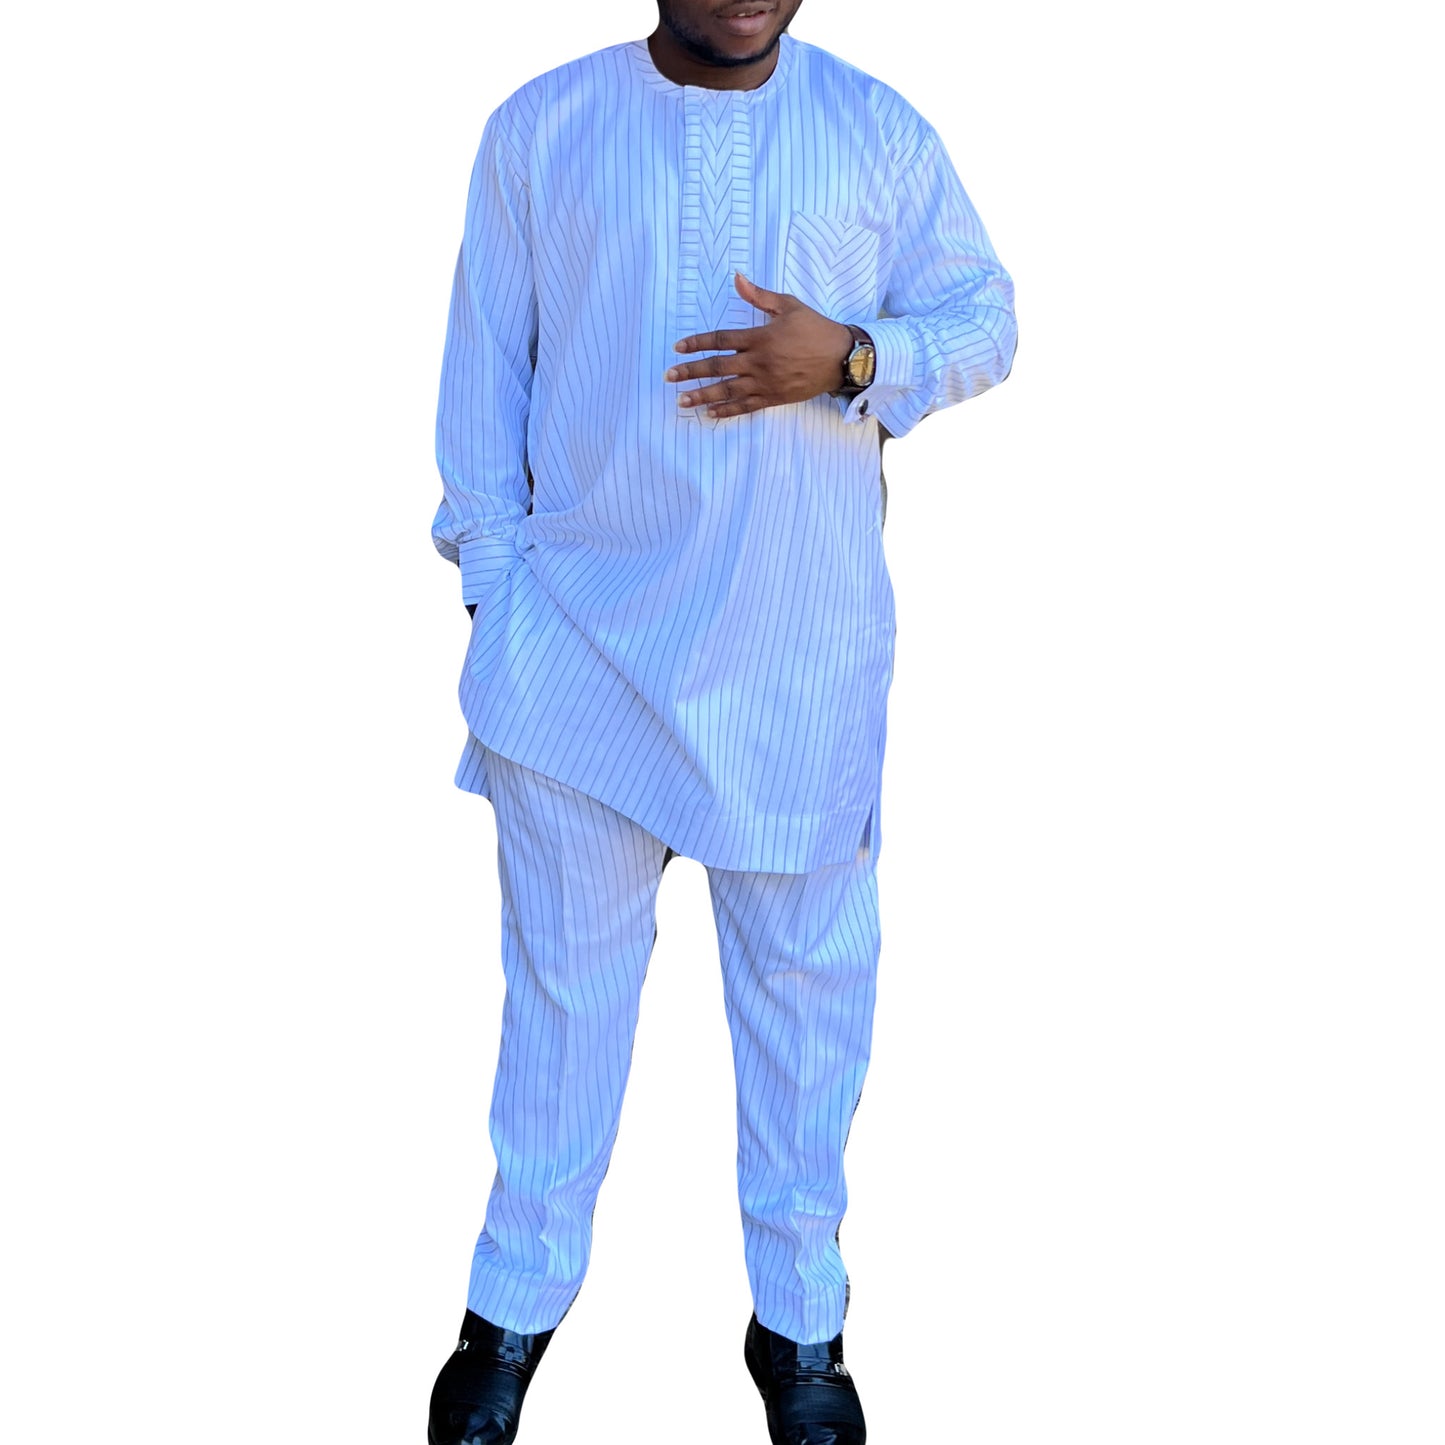 African Men's Formal White strped Clothes, Two Piece Suit Traditional Long Sleeve Nigerian Senator's Outfits